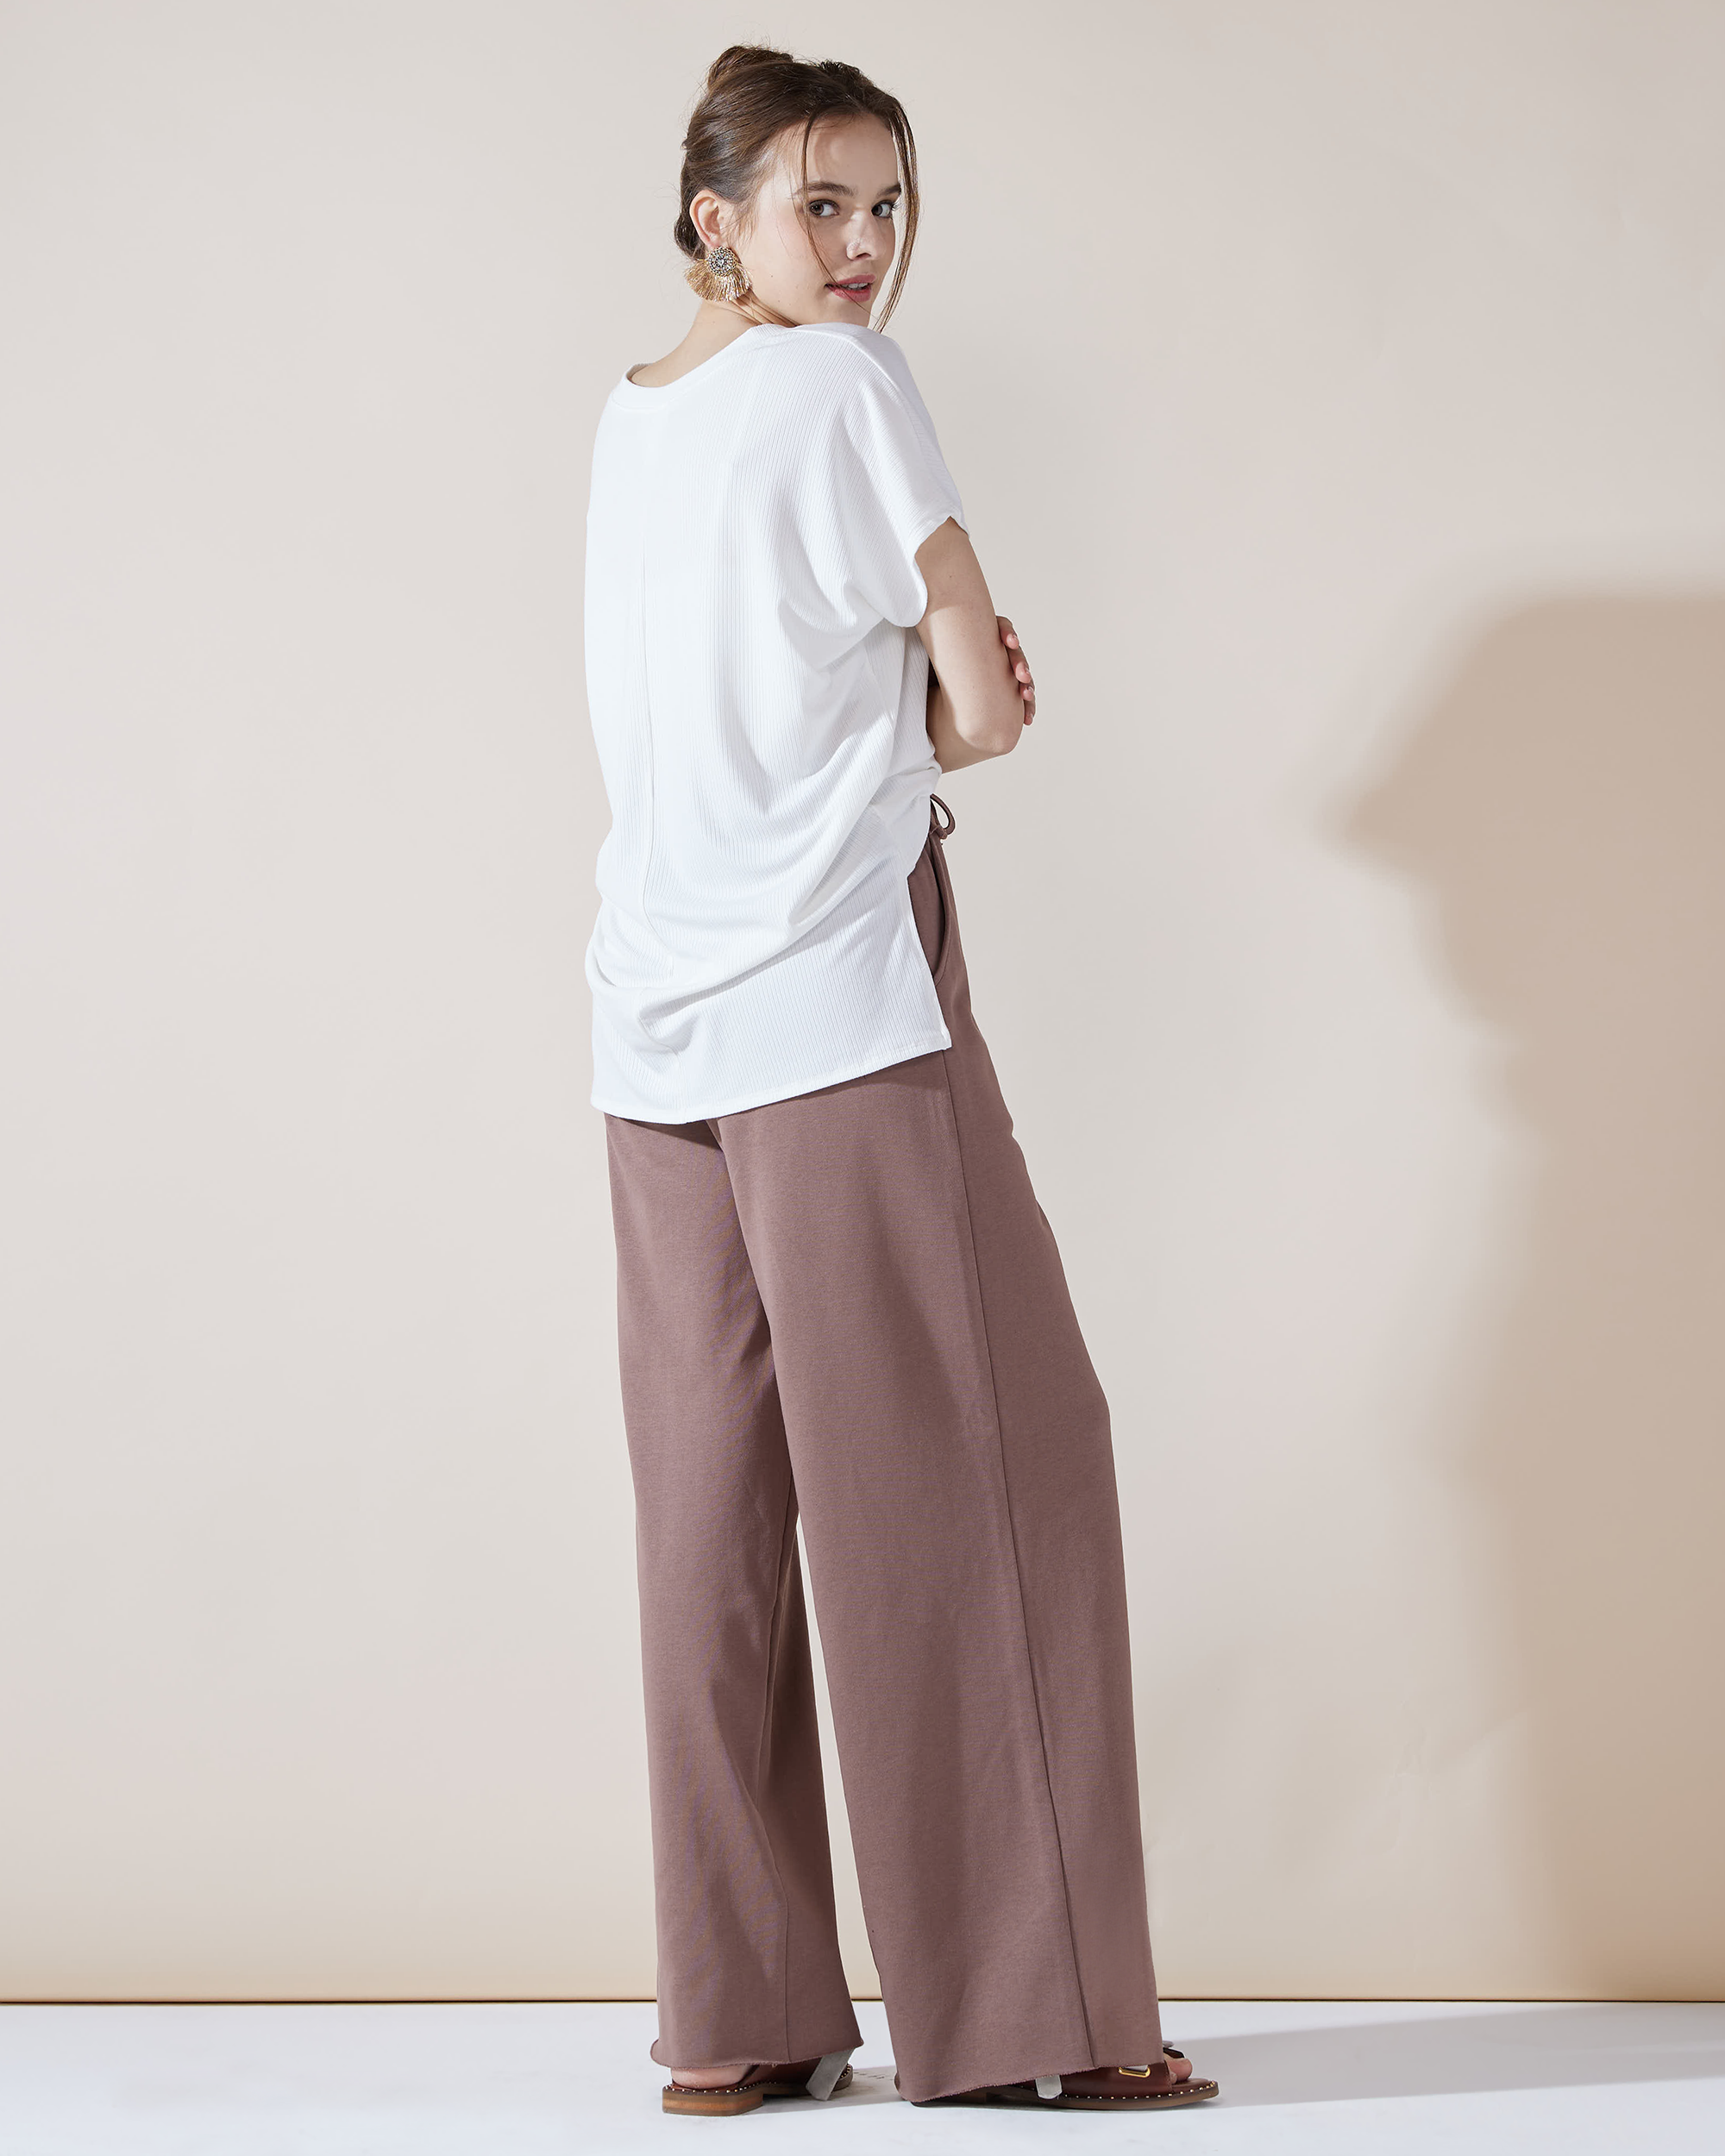 Coco wide leg sweatpants with ruffles